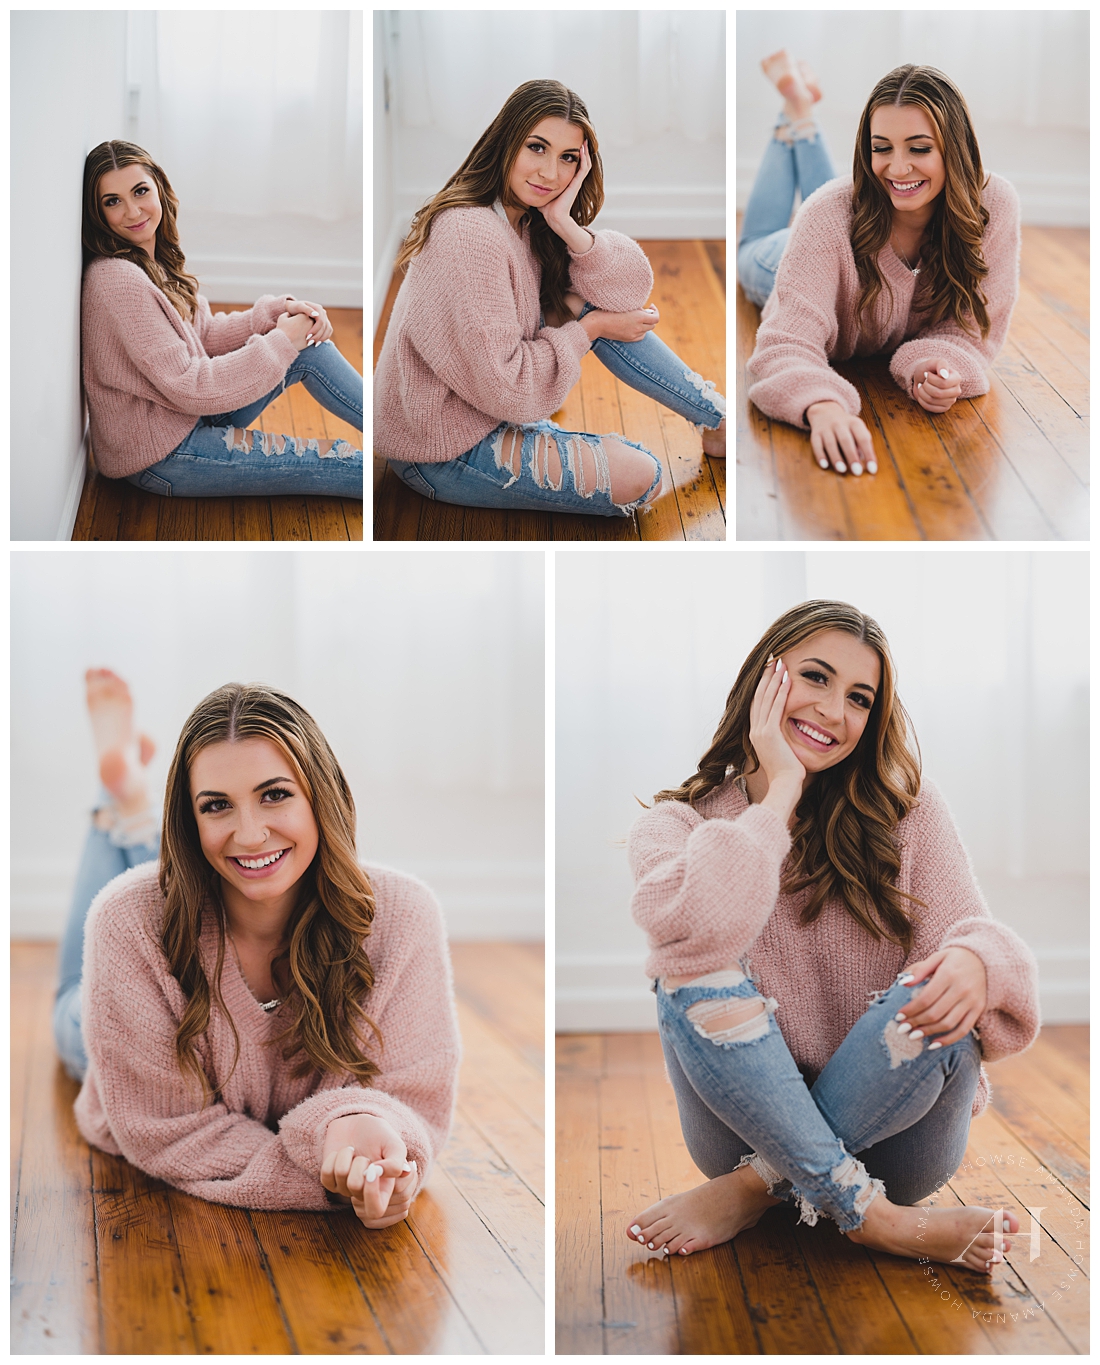 Adorable Barefoot Senior Photos in the Studio | Downtown Tacoma Studio Shoot | Photographed by the Best Tacoma, Washington Senior Photographer Amanda Howse Photography